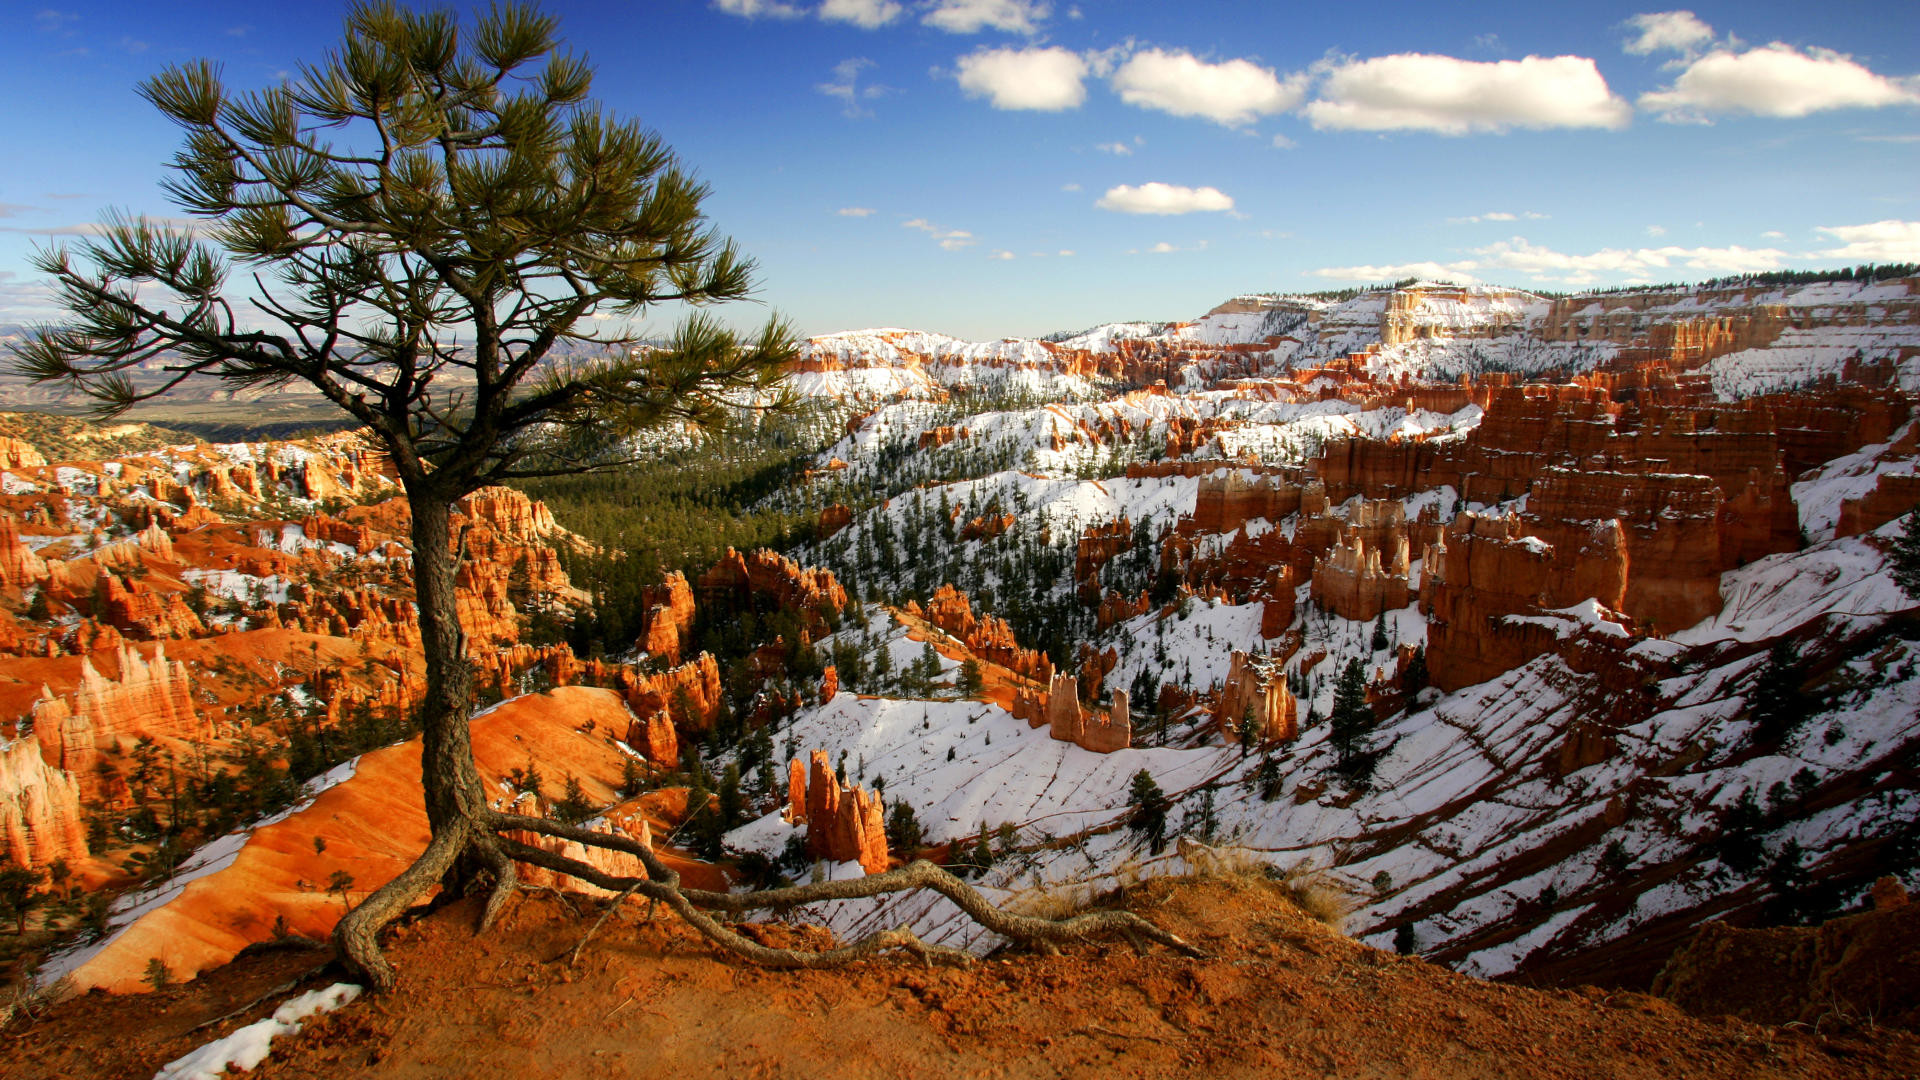 1920x1080 Download Background - Alone on the Rim, Bryce Canyon National Park, Utah -  Free Cool Backgrounds and Wallpapers for your Desktop Or Laptop.